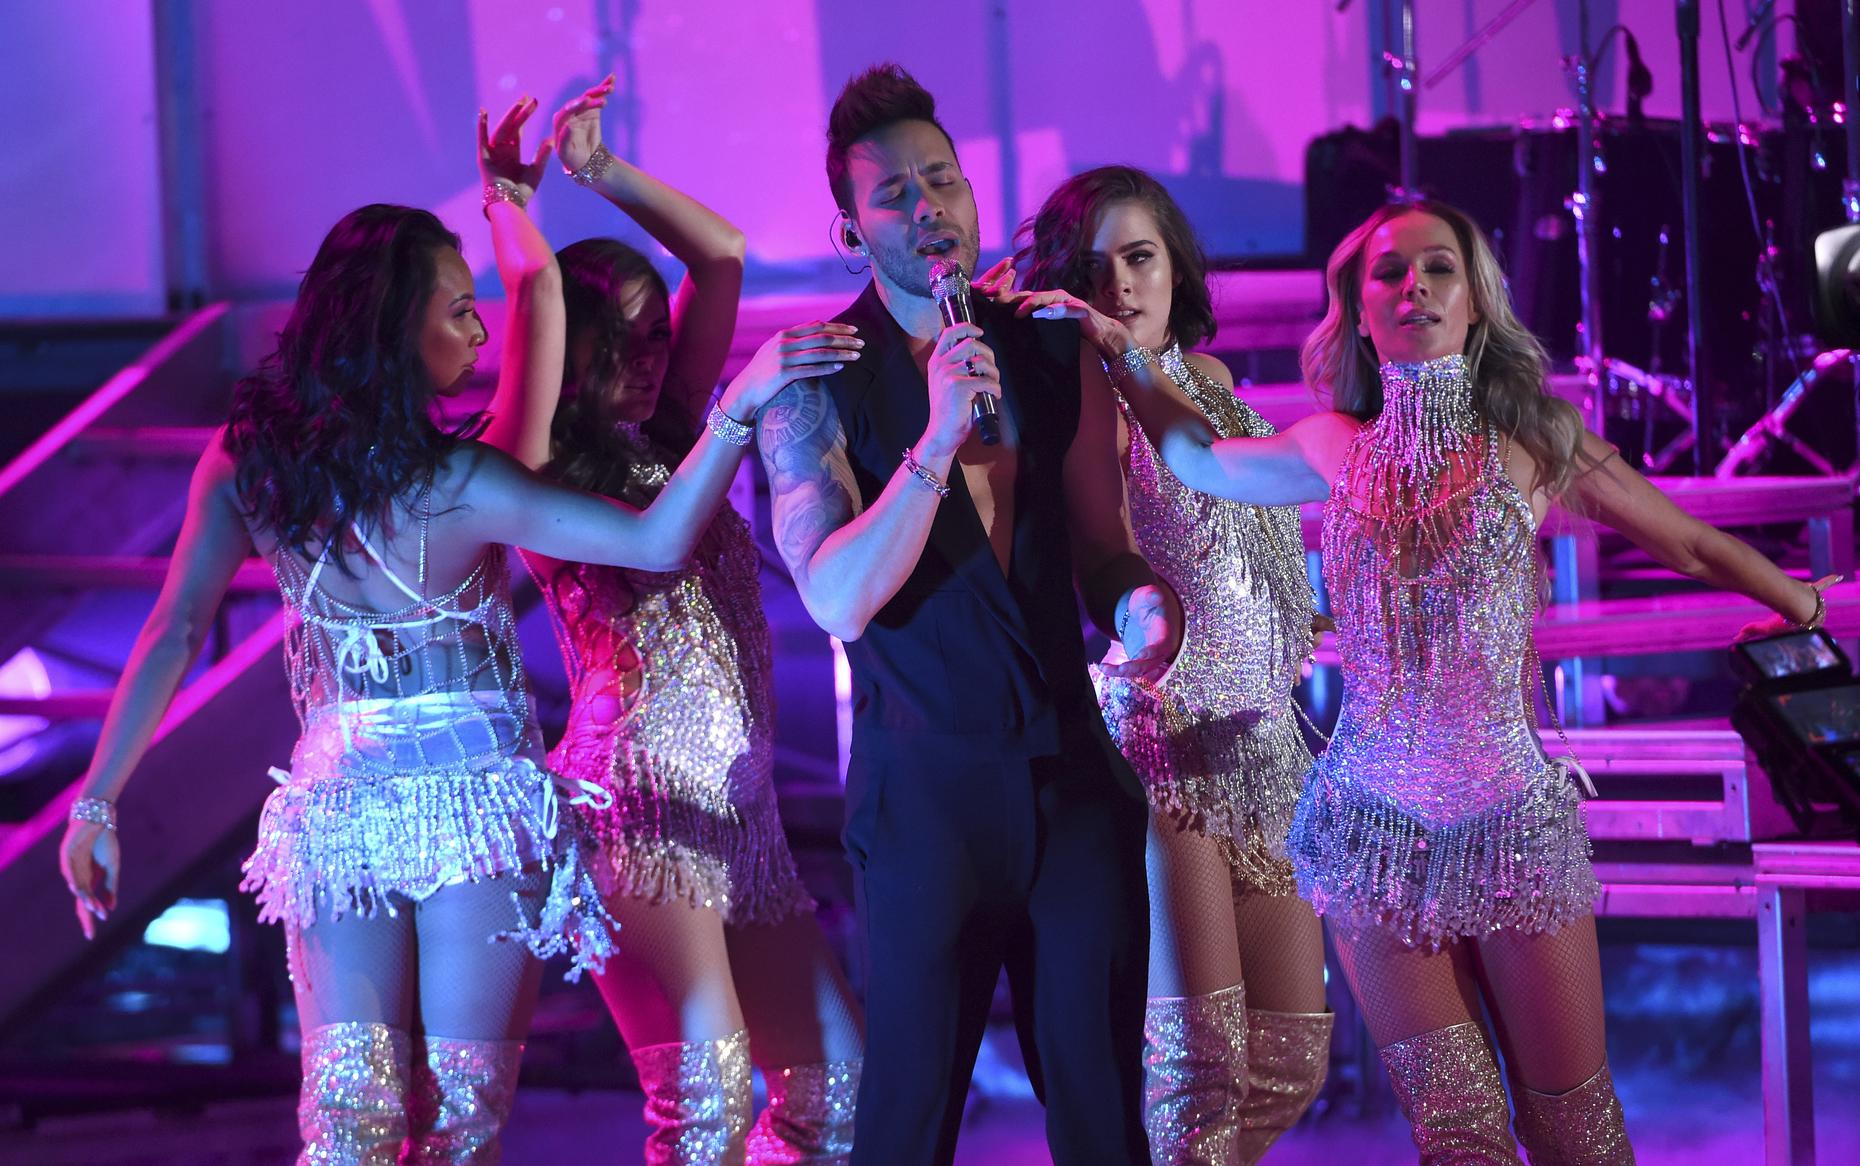 Why We're So Excited About J Balvin's 'El Tiny' Concert Video : NPR